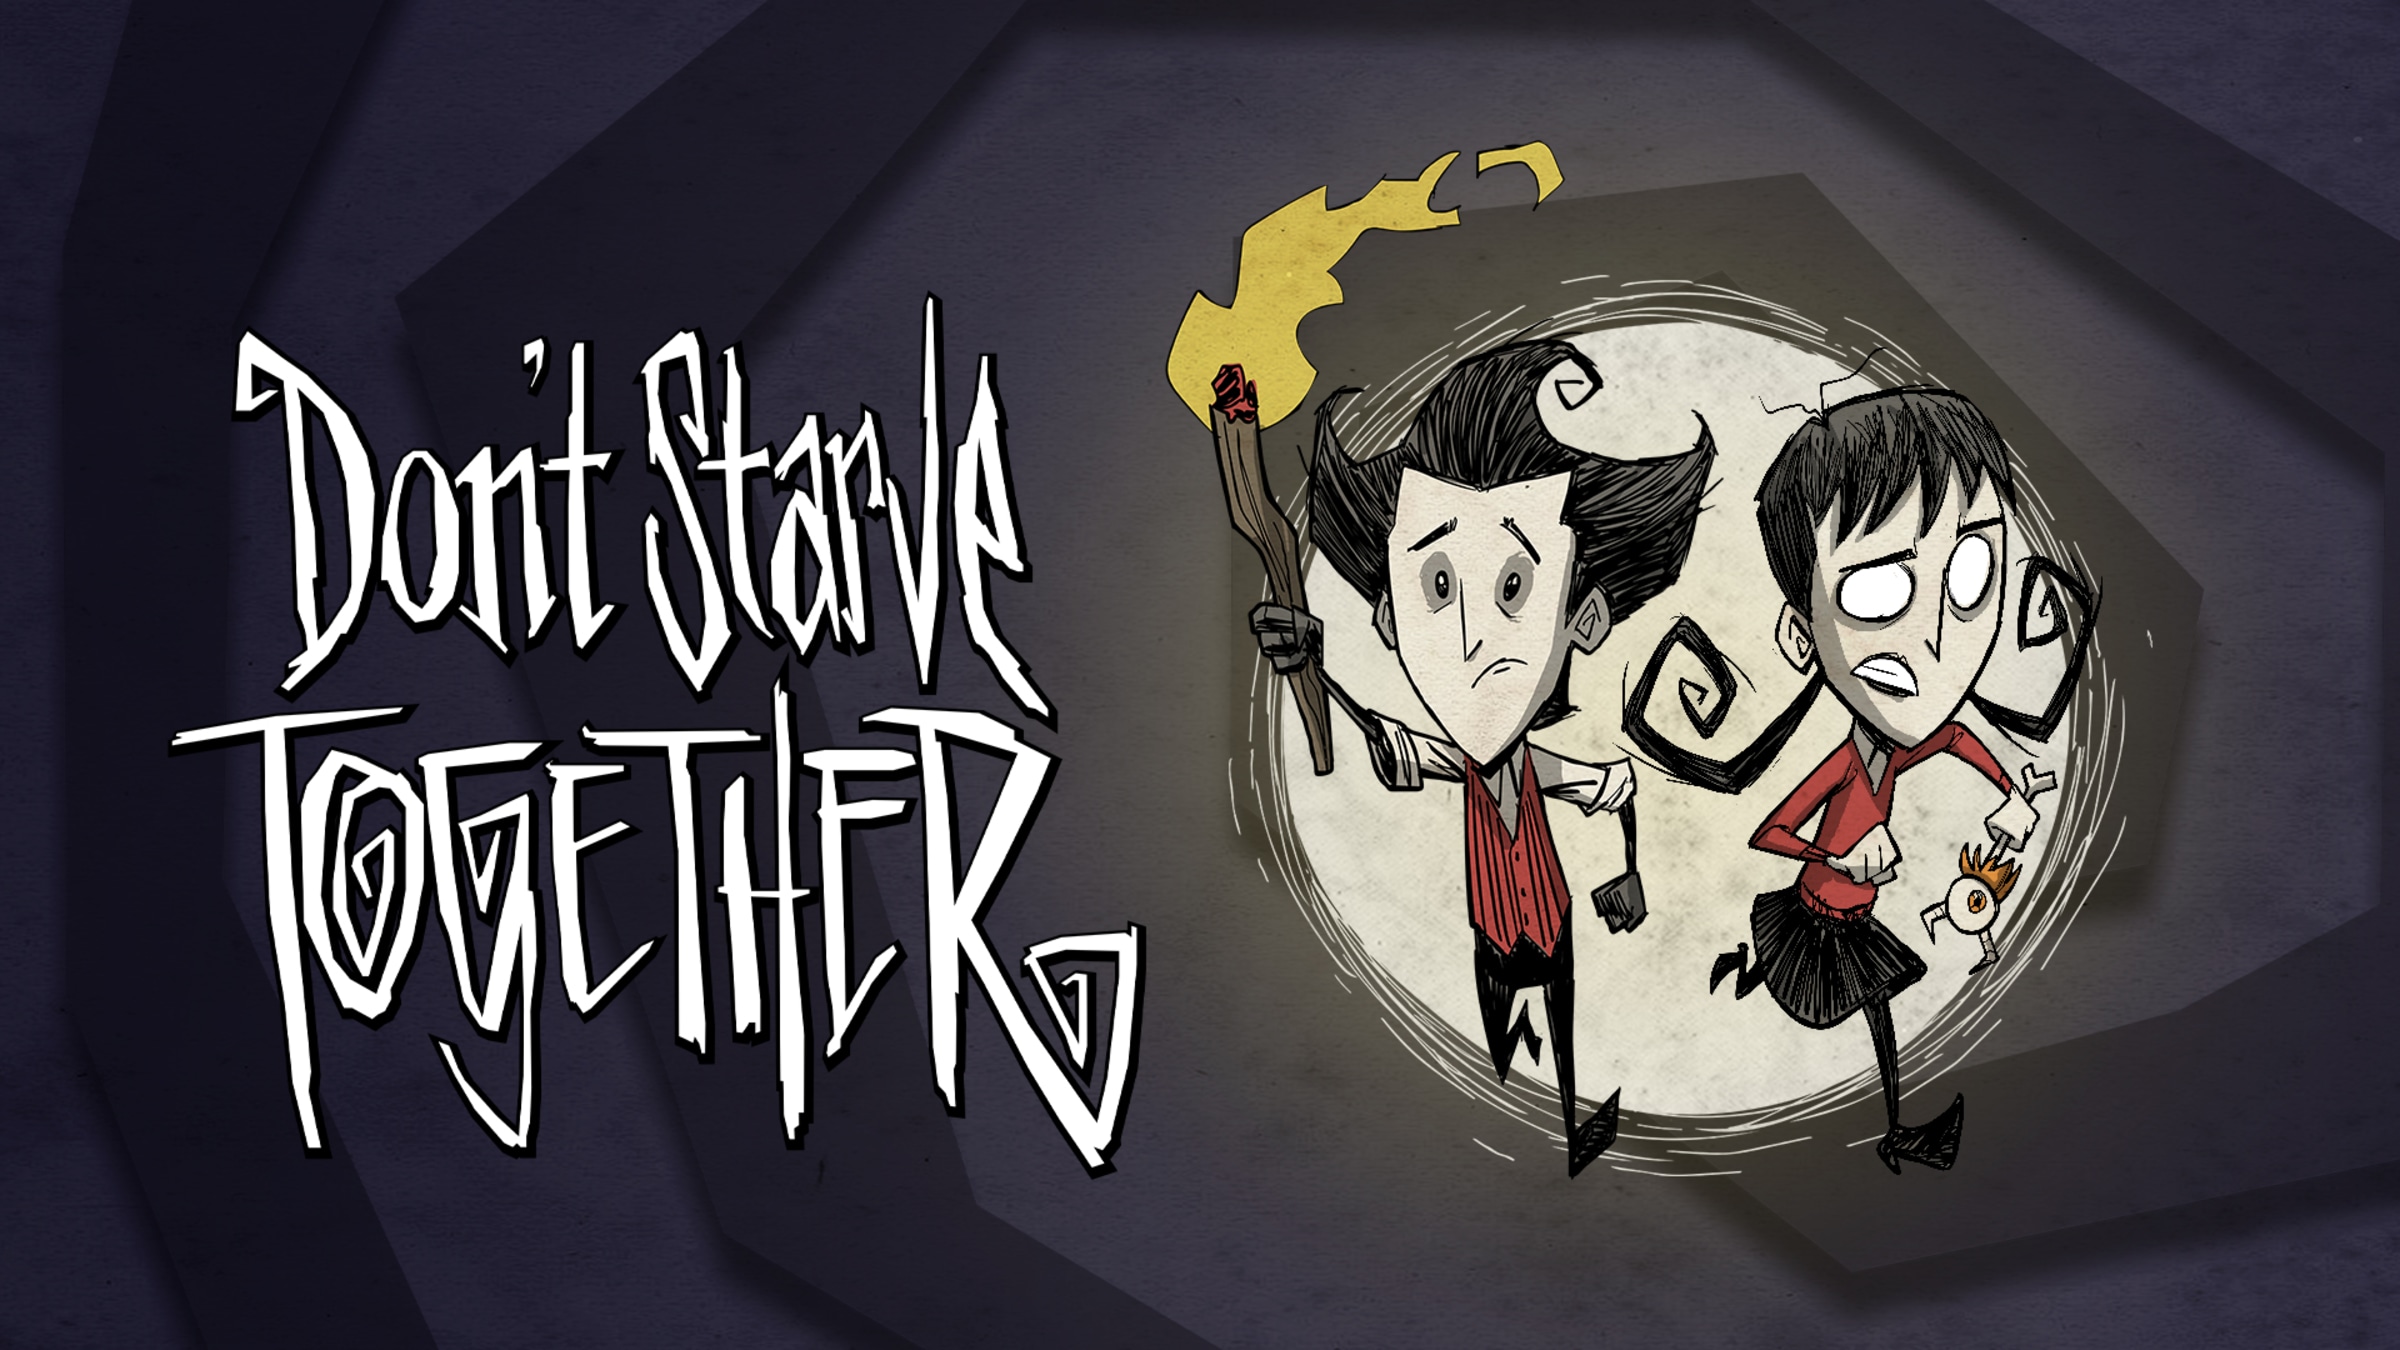 voice global clumsy Don't Starve Together for Nintendo Switch - Nintendo Official Site